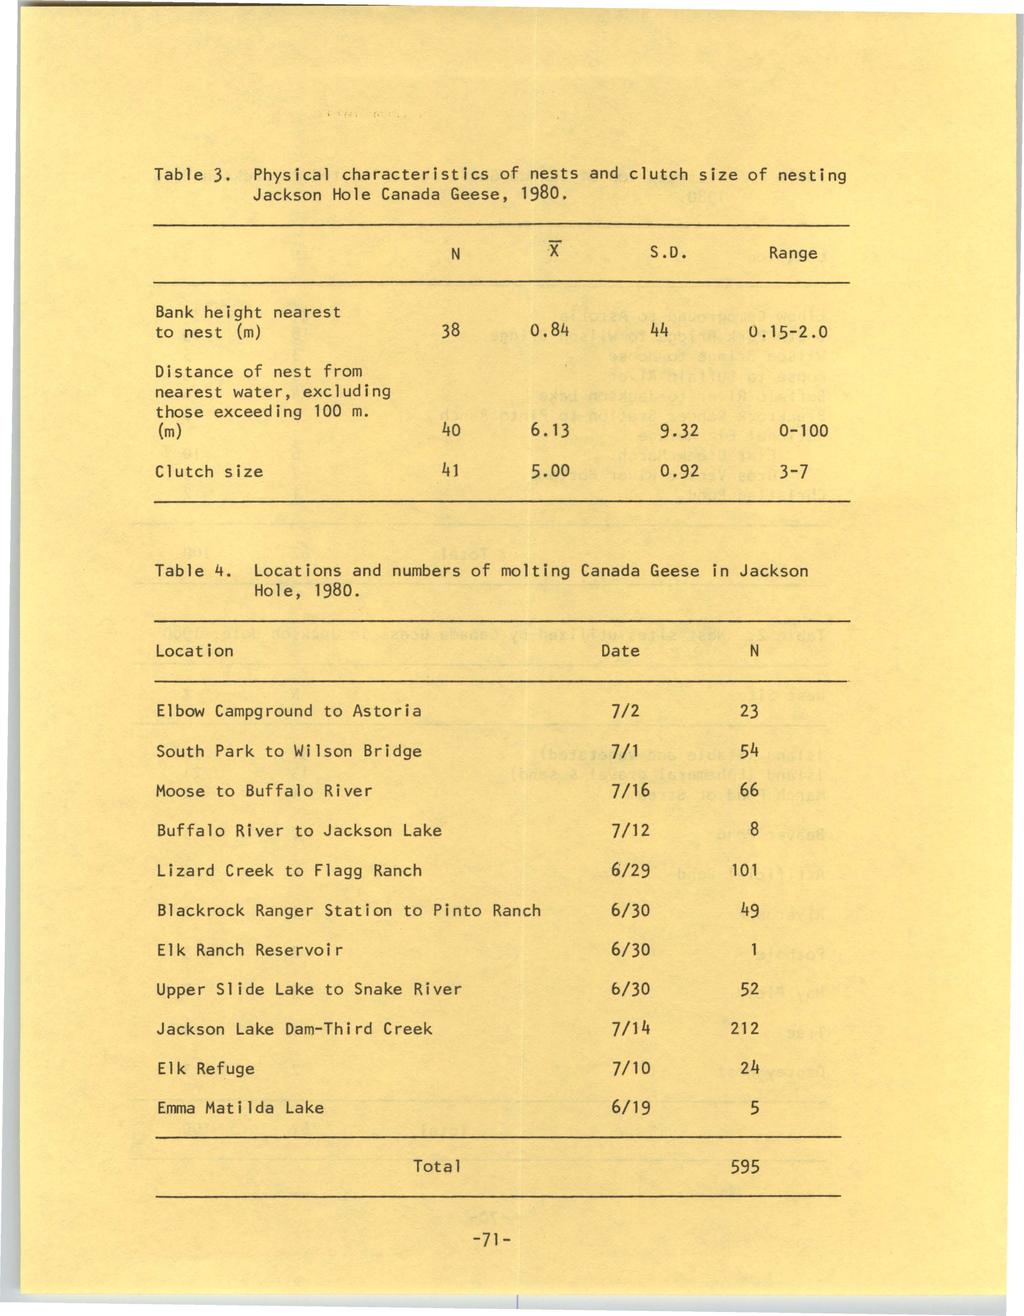 National Park Service Research Center Annual Report, Vol. 4 [1980], Art. 15 Table. Physical characteristics of nests and clutch size of nesting Jackson Hole Canada Geese, 1980. N x S.D.